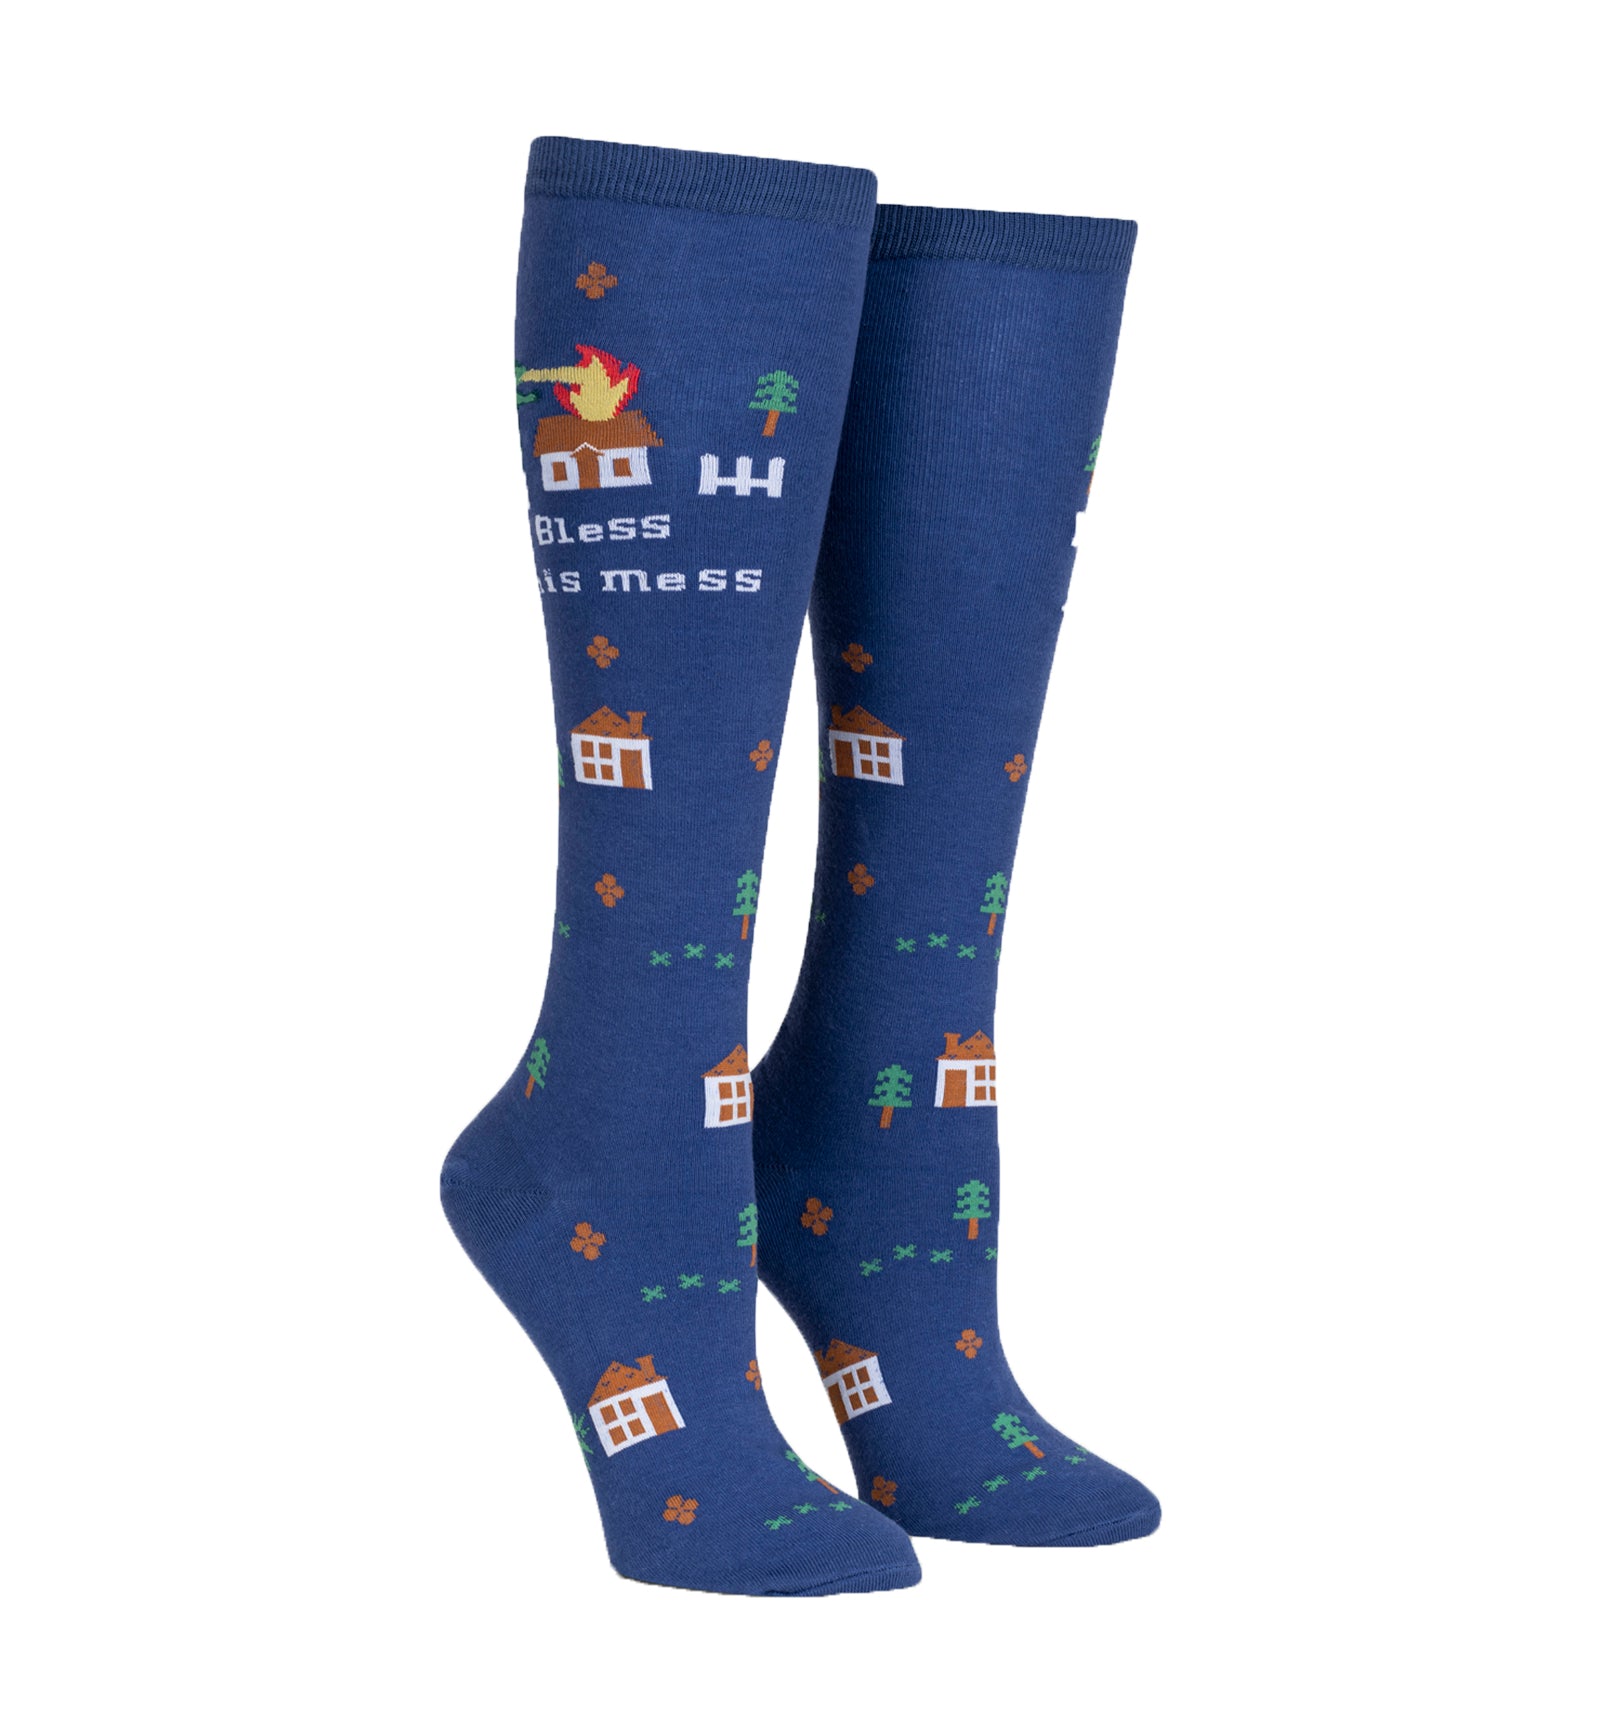 SOCK it to me Unisex Knee High Socks (F0636),Bless This Mess - Bless This Mess,One Size